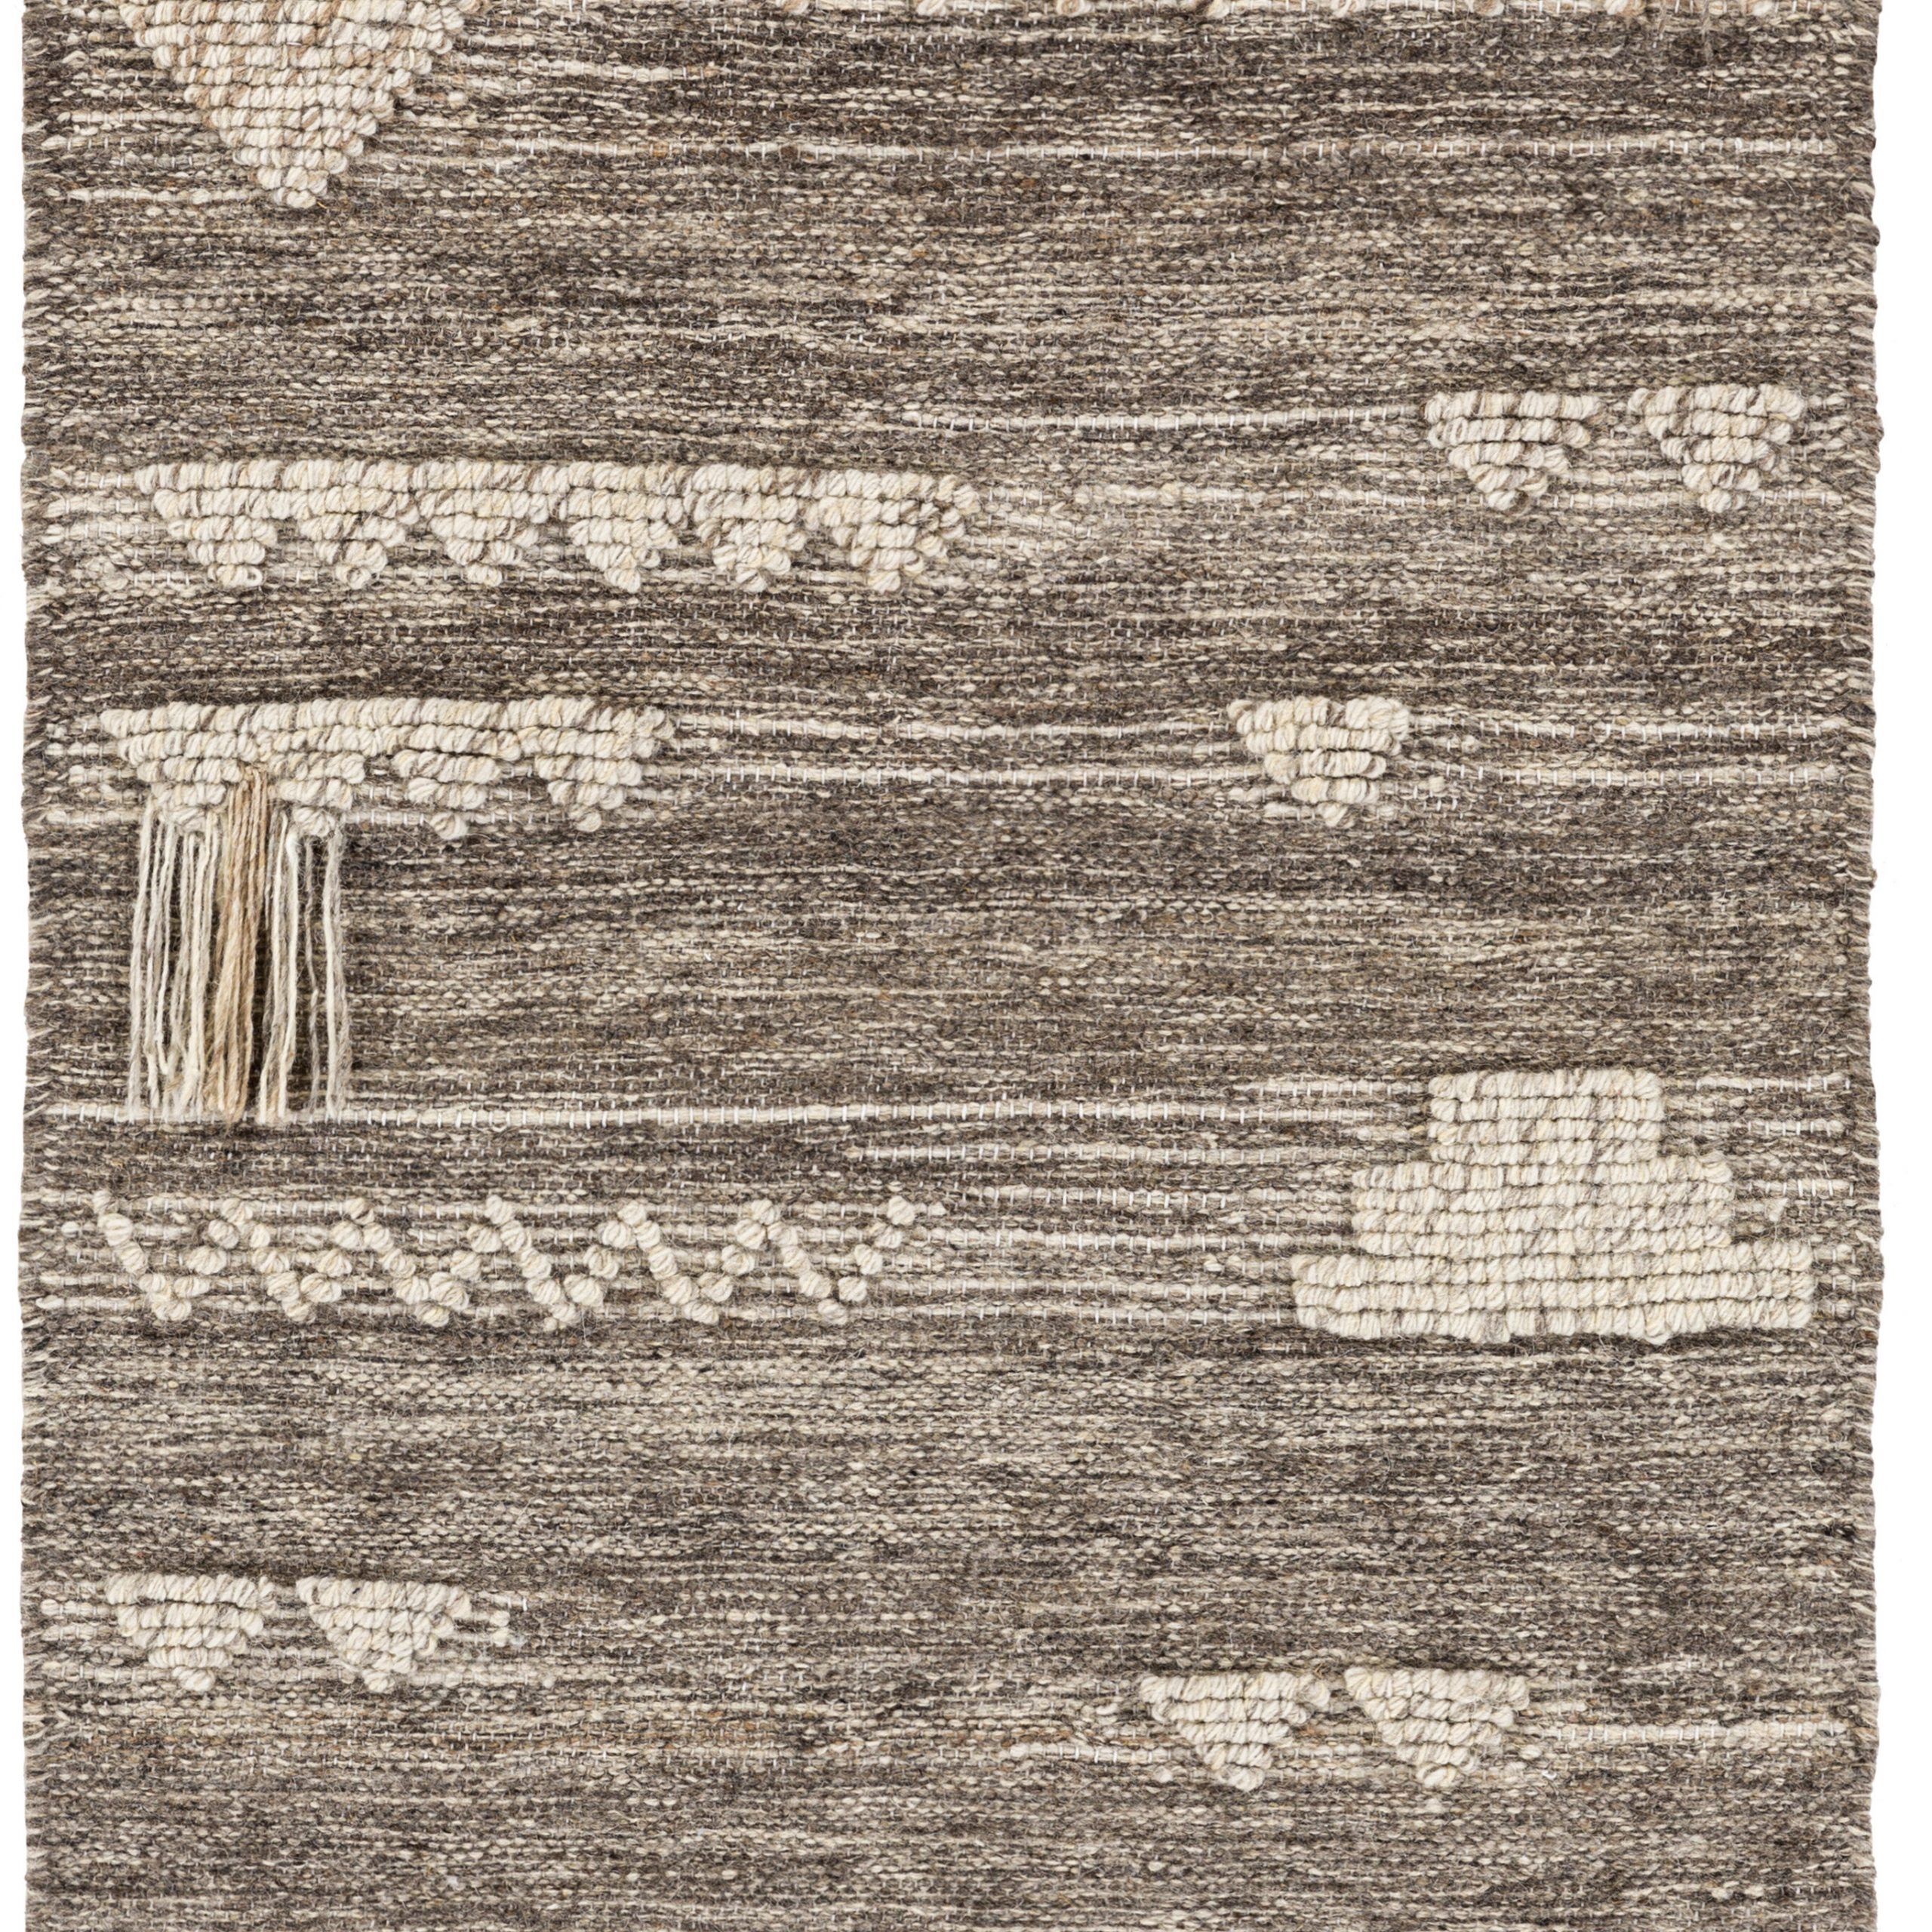 Oversized Hand Woven Wall Hanging Inside 2018 Blended Fabric Hohl Wall Hangings With Rod (View 18 of 20)